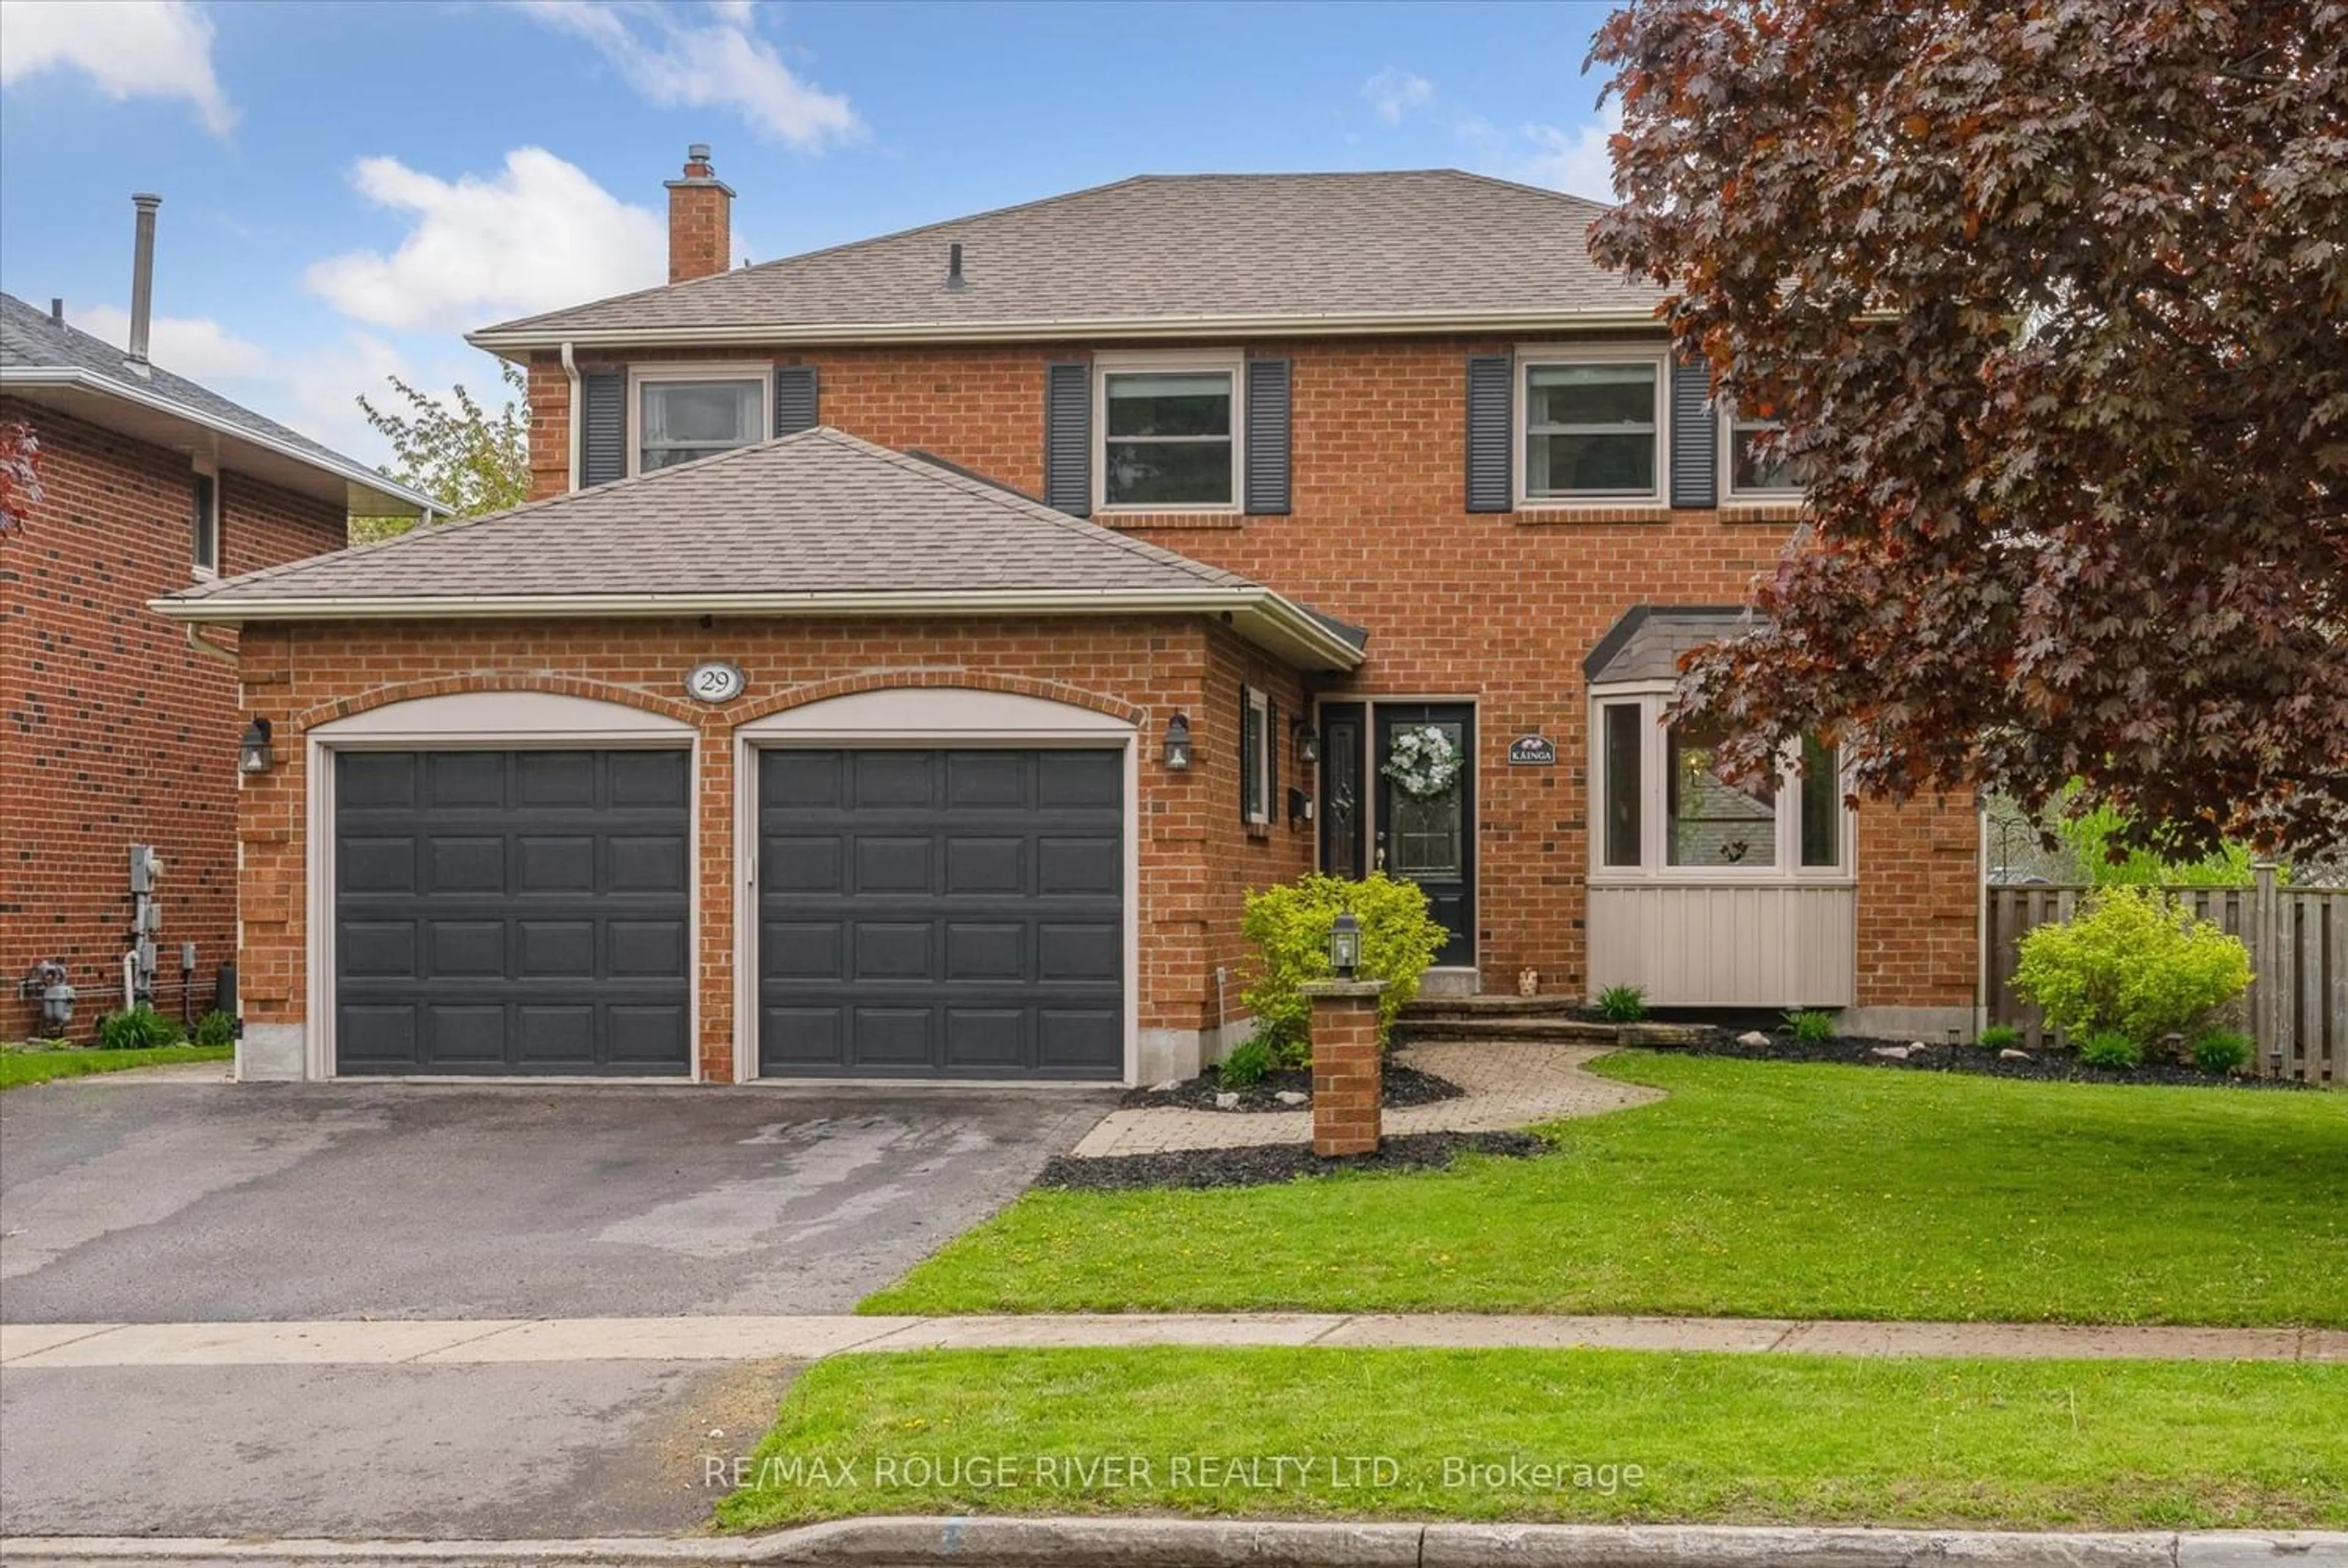 Home with brick exterior material for 29 Canadian Oaks Dr, Whitby Ontario L1N 6X5